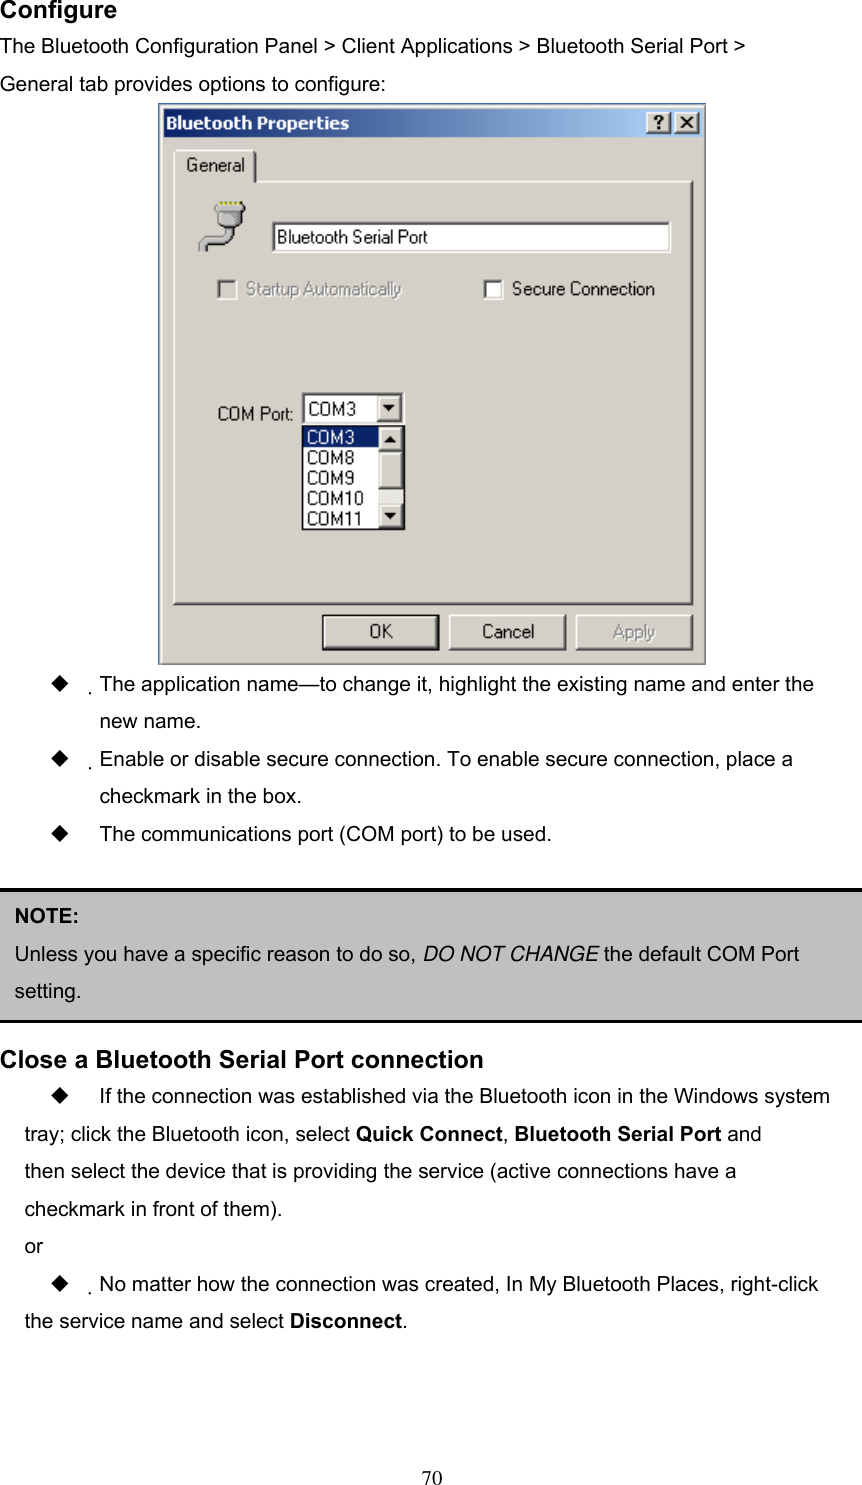 Configure The Bluetooth Configuration Panel &gt; Client Applications &gt; Bluetooth Serial Port &gt; General tab provides options to configure:    The application name—to change it, highlight the existing name and enter the new name.   Enable or disable secure connection. To enable secure connection, place a checkmark in the box.   The communications port (COM port) to be used.      NOTE:  Unless you have a specific reason to do so, DO NOT CHANGE the default COM Port setting. Close a Bluetooth Serial Port connection   If the connection was established via the Bluetooth icon in the Windows system tray; click the Bluetooth icon, select Quick Connect, Bluetooth Serial Port and then select the device that is providing the service (active connections have a checkmark in front of them). or   No matter how the connection was created, In My Bluetooth Places, right-click the service name and select Disconnect.   70 